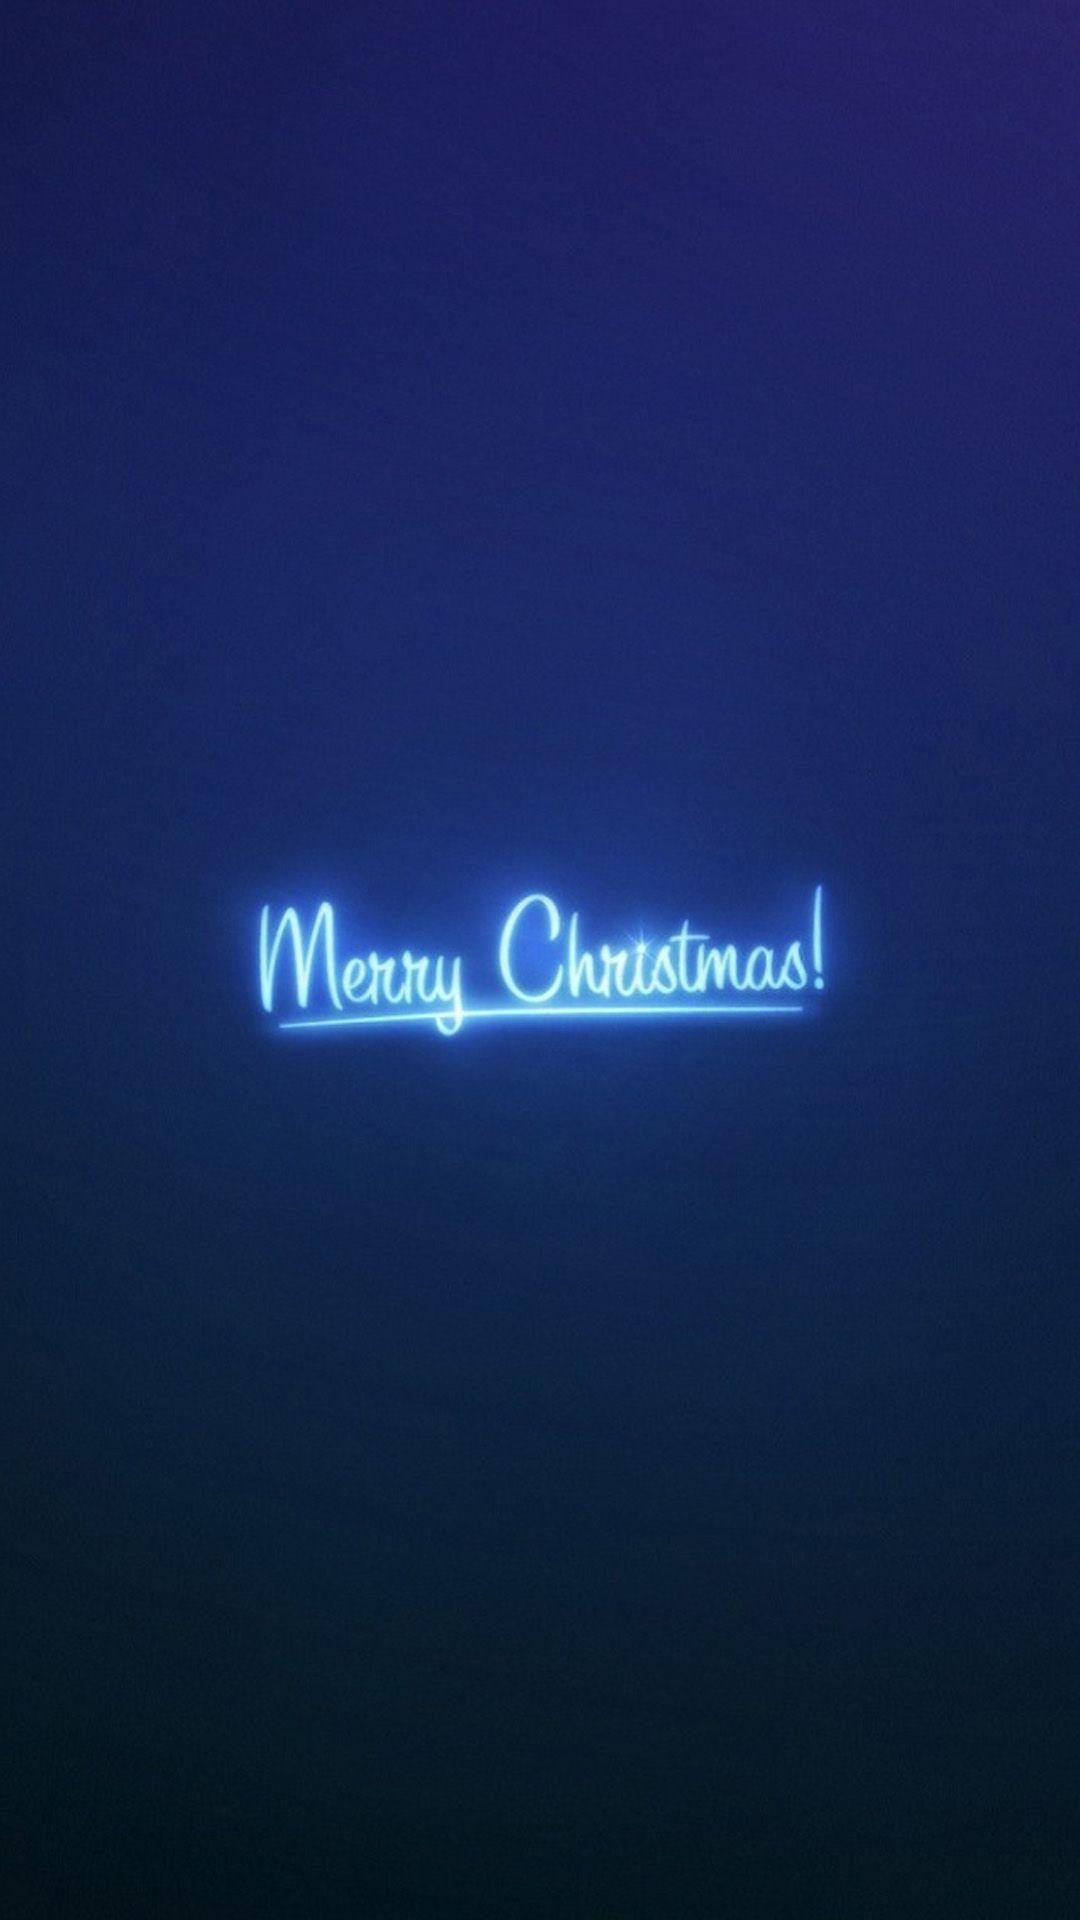 Merry Christmas Neon Blue Light Android Wallpaper free download